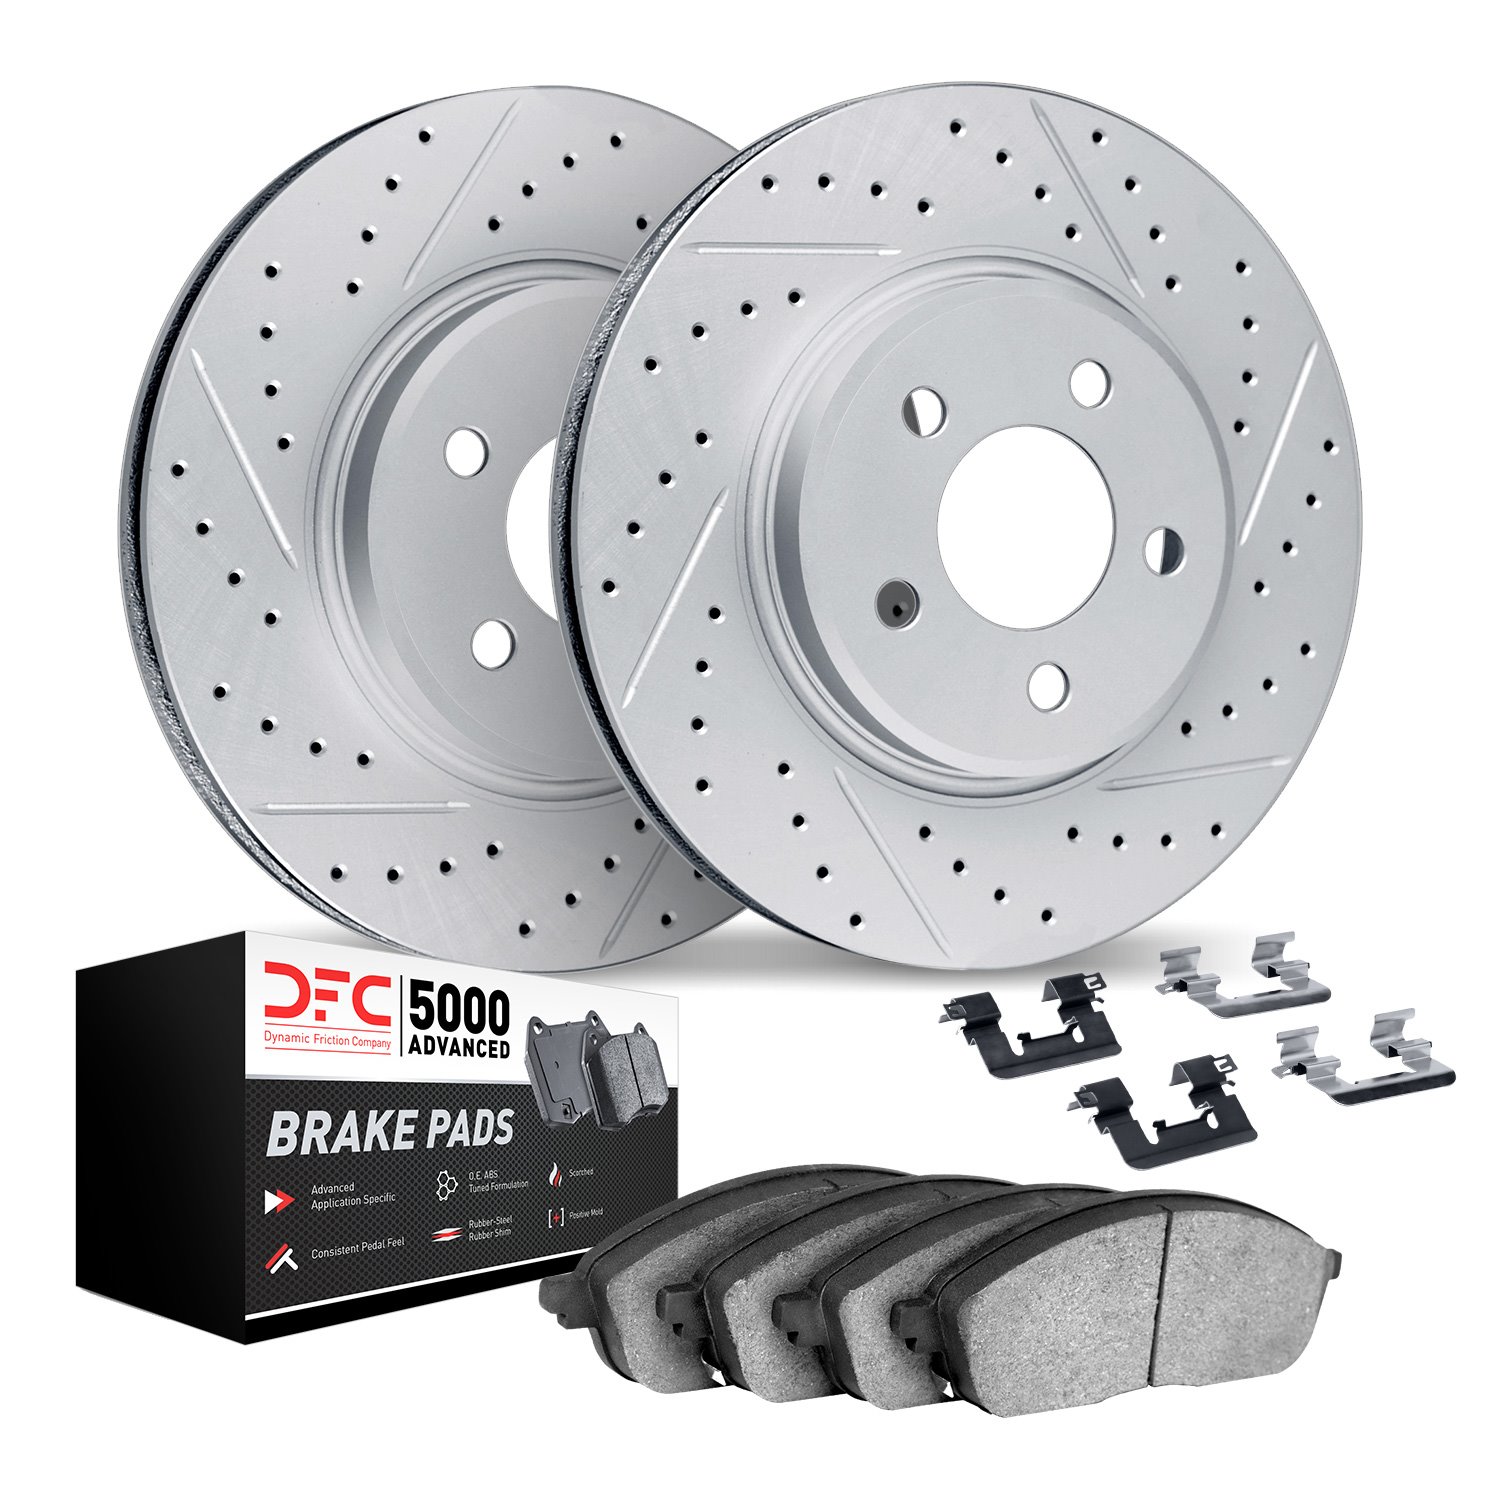 2512-31120 Geoperformance Drilled/Slotted Rotors w/5000 Advanced Brake Pads Kit & Hardware, Fits Select BMW, Position: Rear